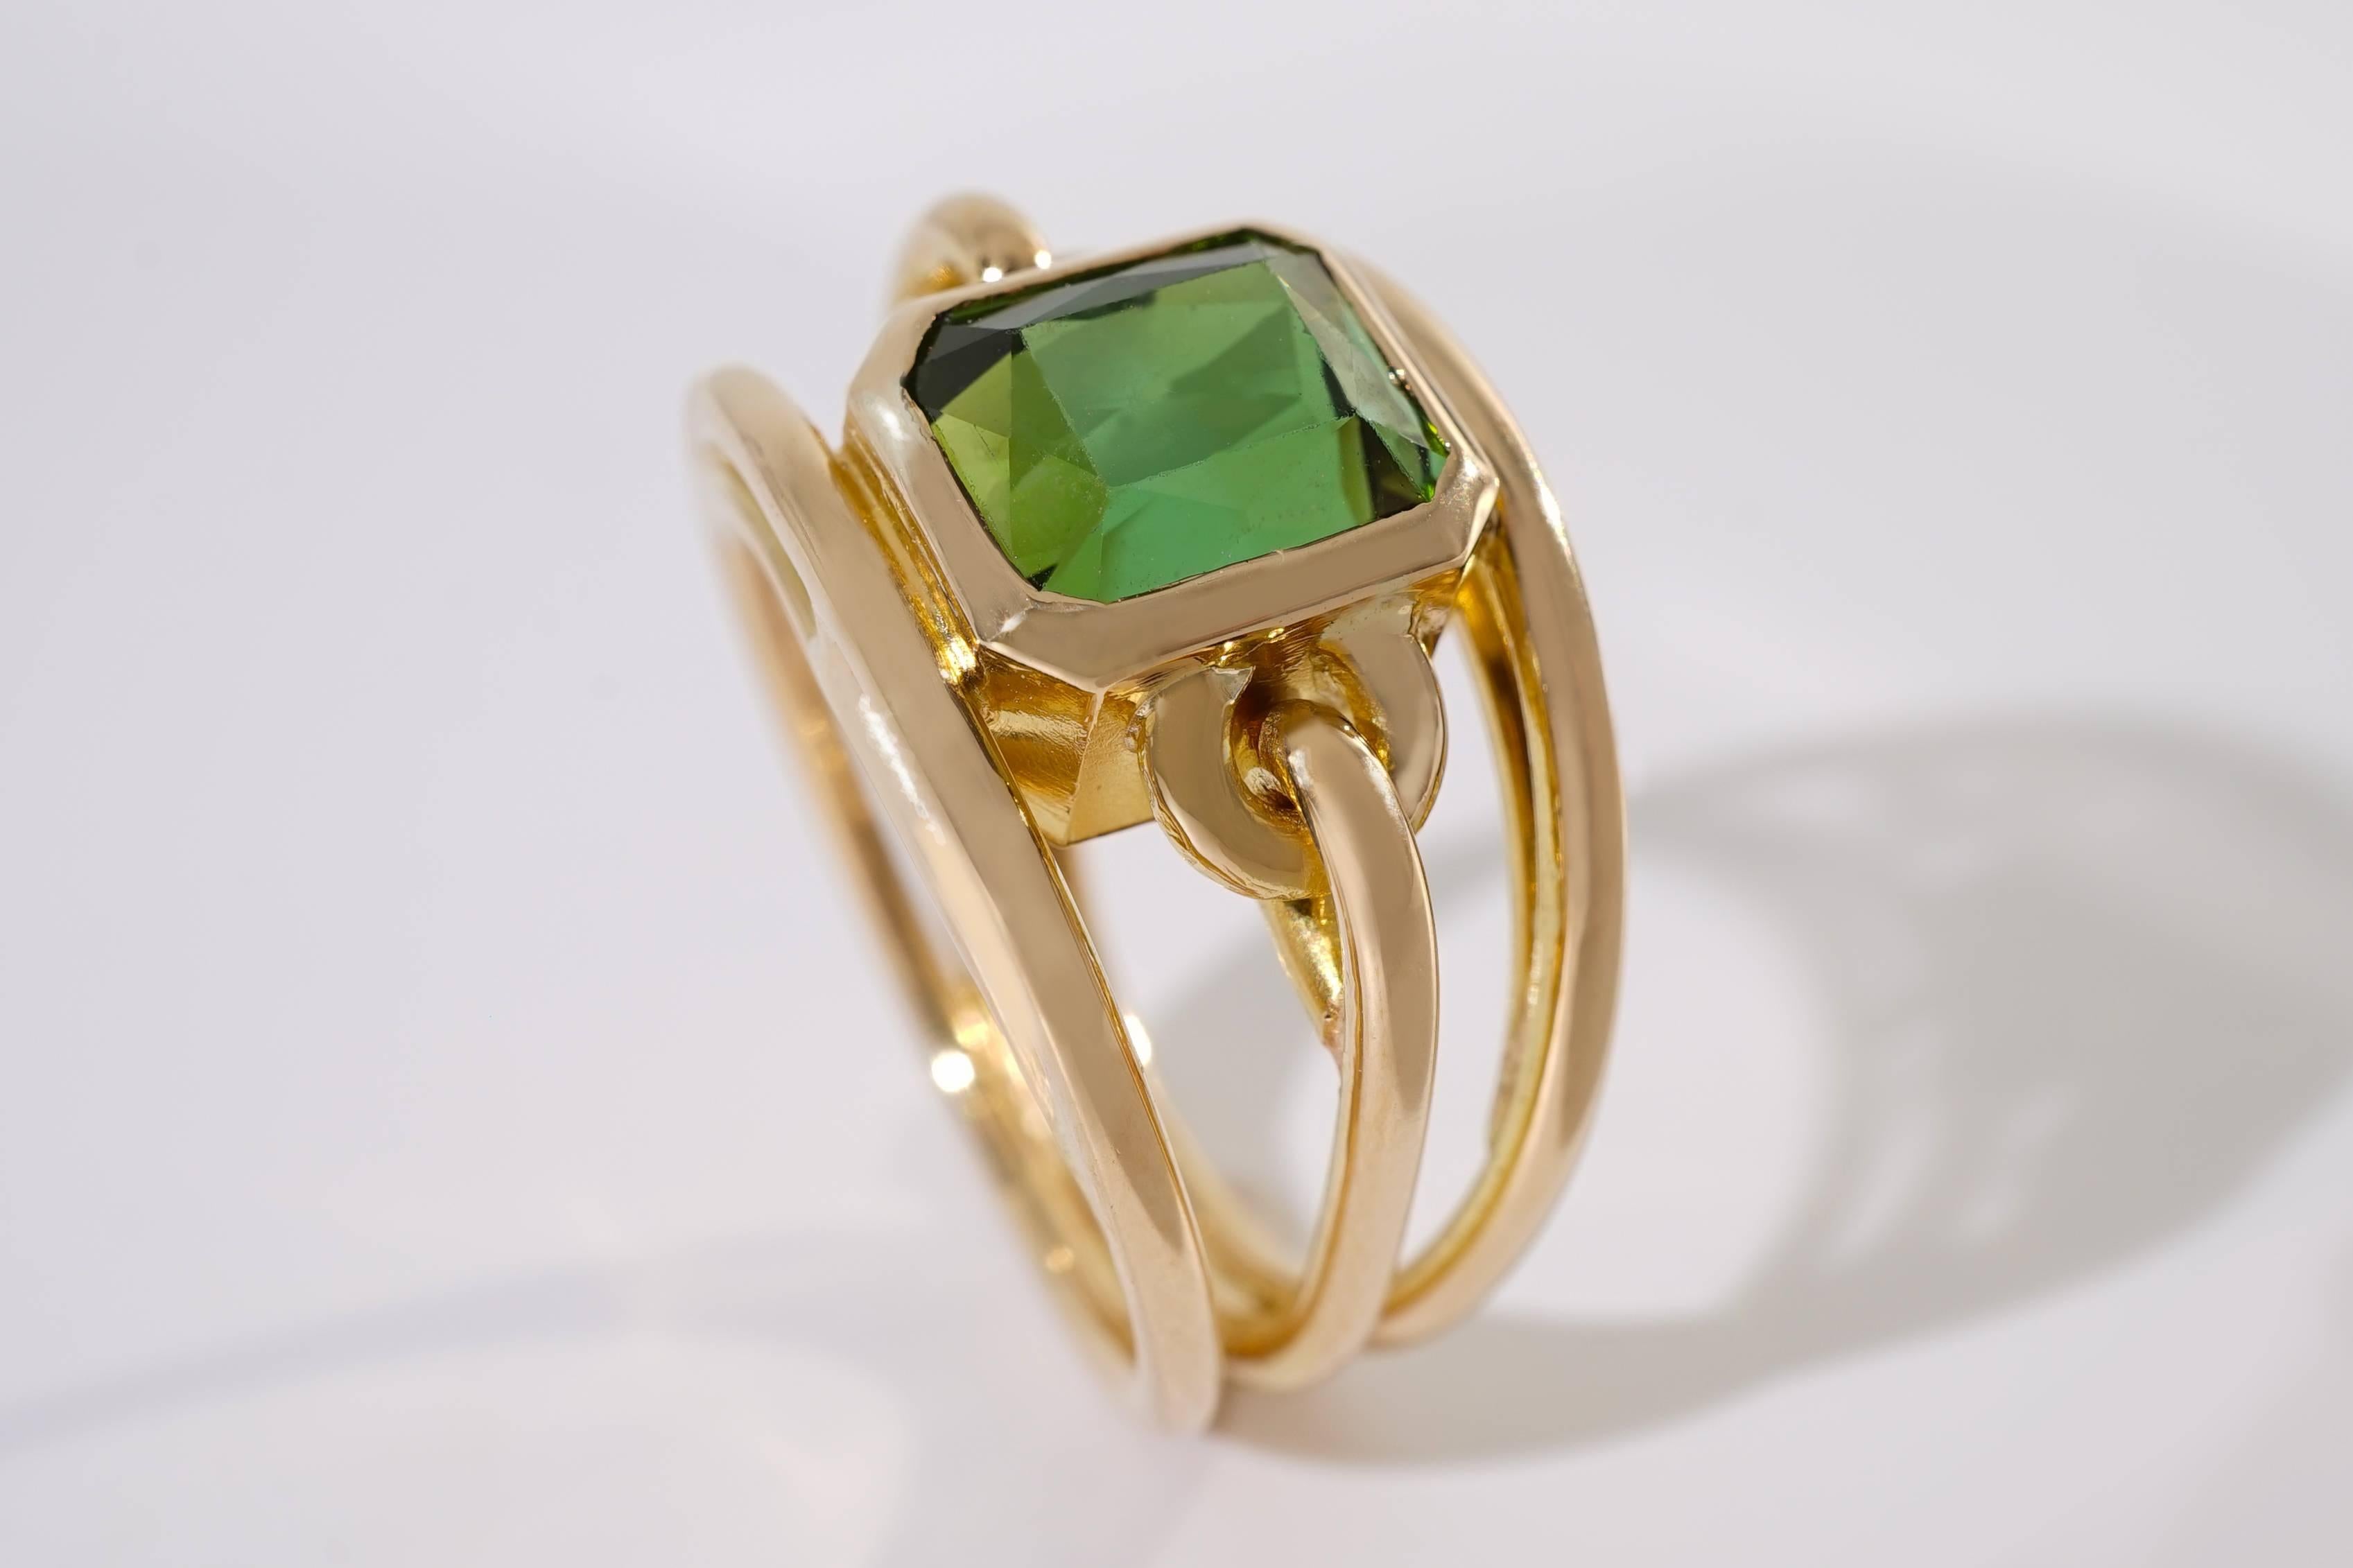 Coralie Van Caloen Gold 18 Carat Strap Band Ring With Green Tourmaline is entirely hand made and forged in Belgium by experts goldsmiths therefore it is a very unique piece. The design of the ring is elegant and contemporary. The Tourmaline has